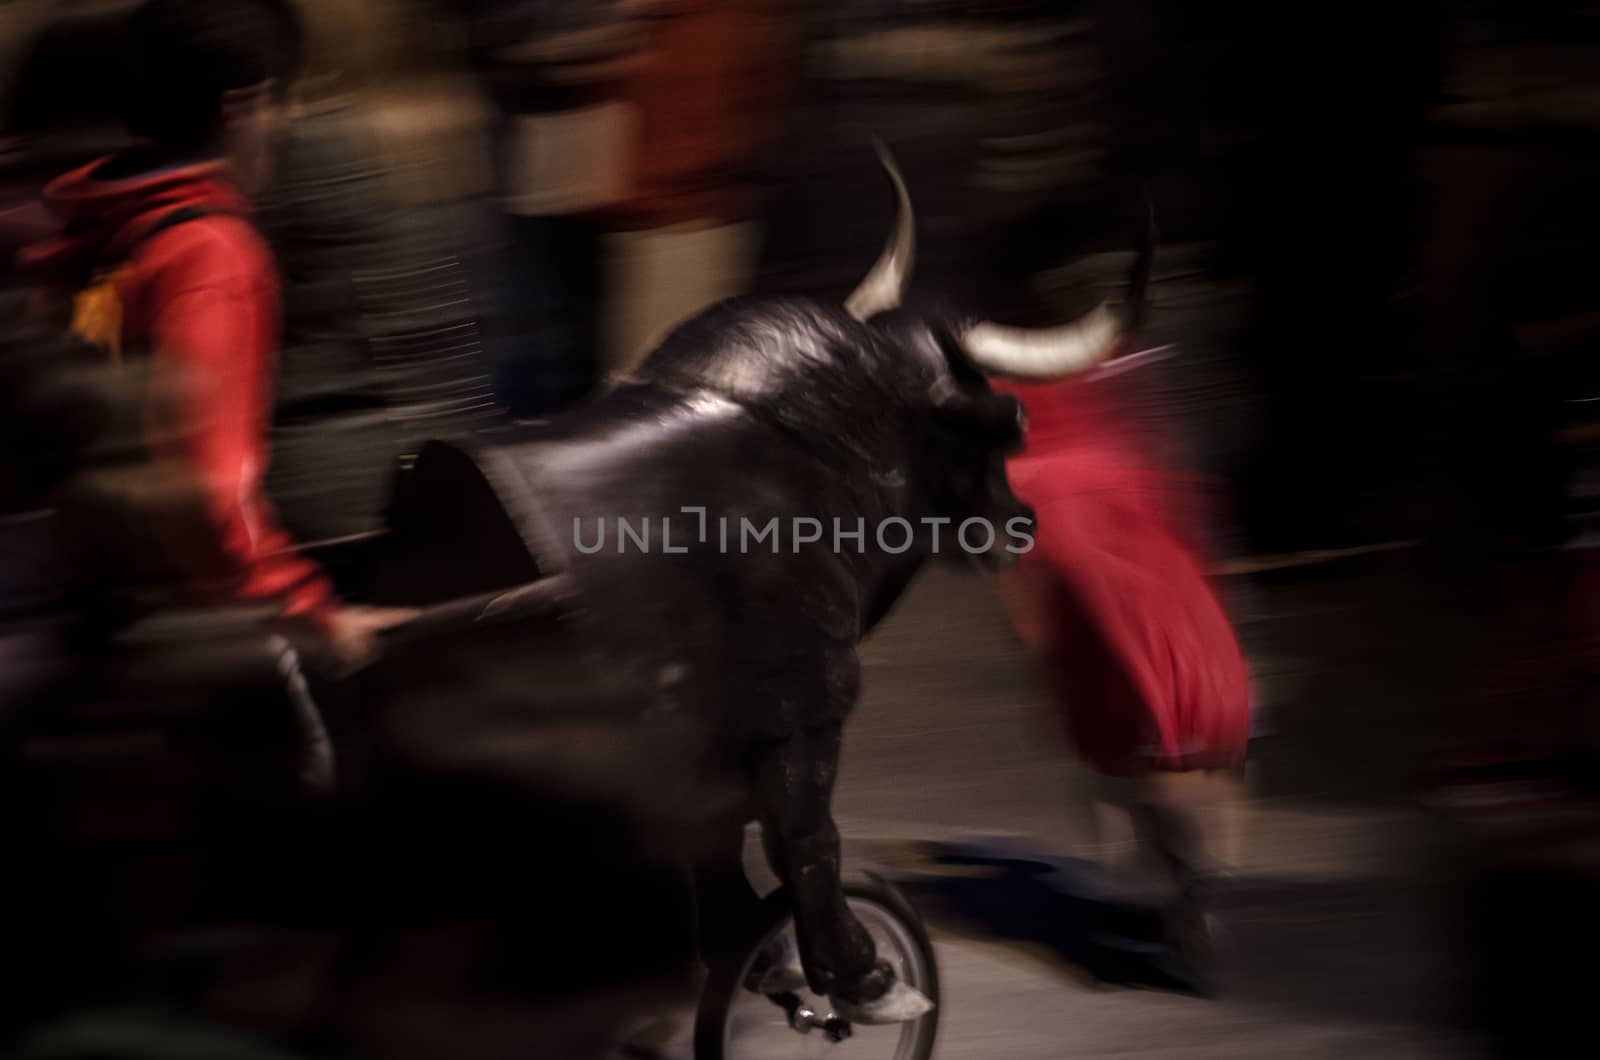 Typical fake bull with a wheel that pursues kids in spanish village festivals